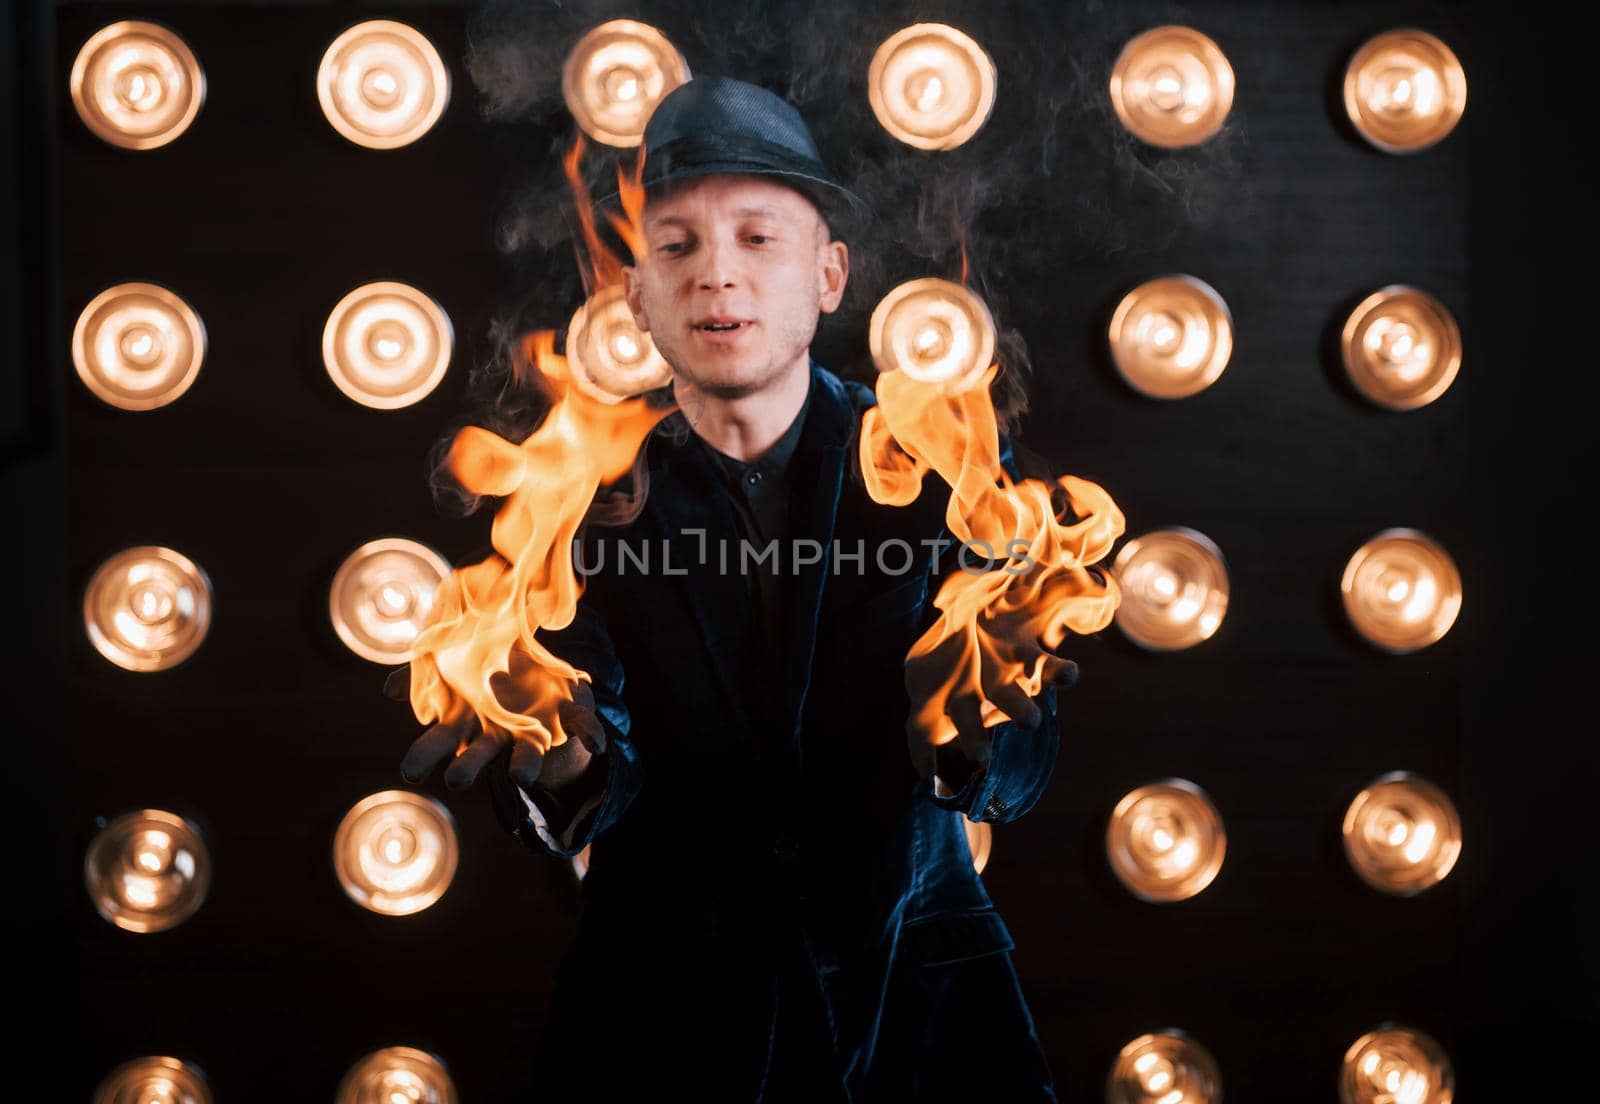 The fire is in his hands. Professional magician showing trick. Light bulbs on background.